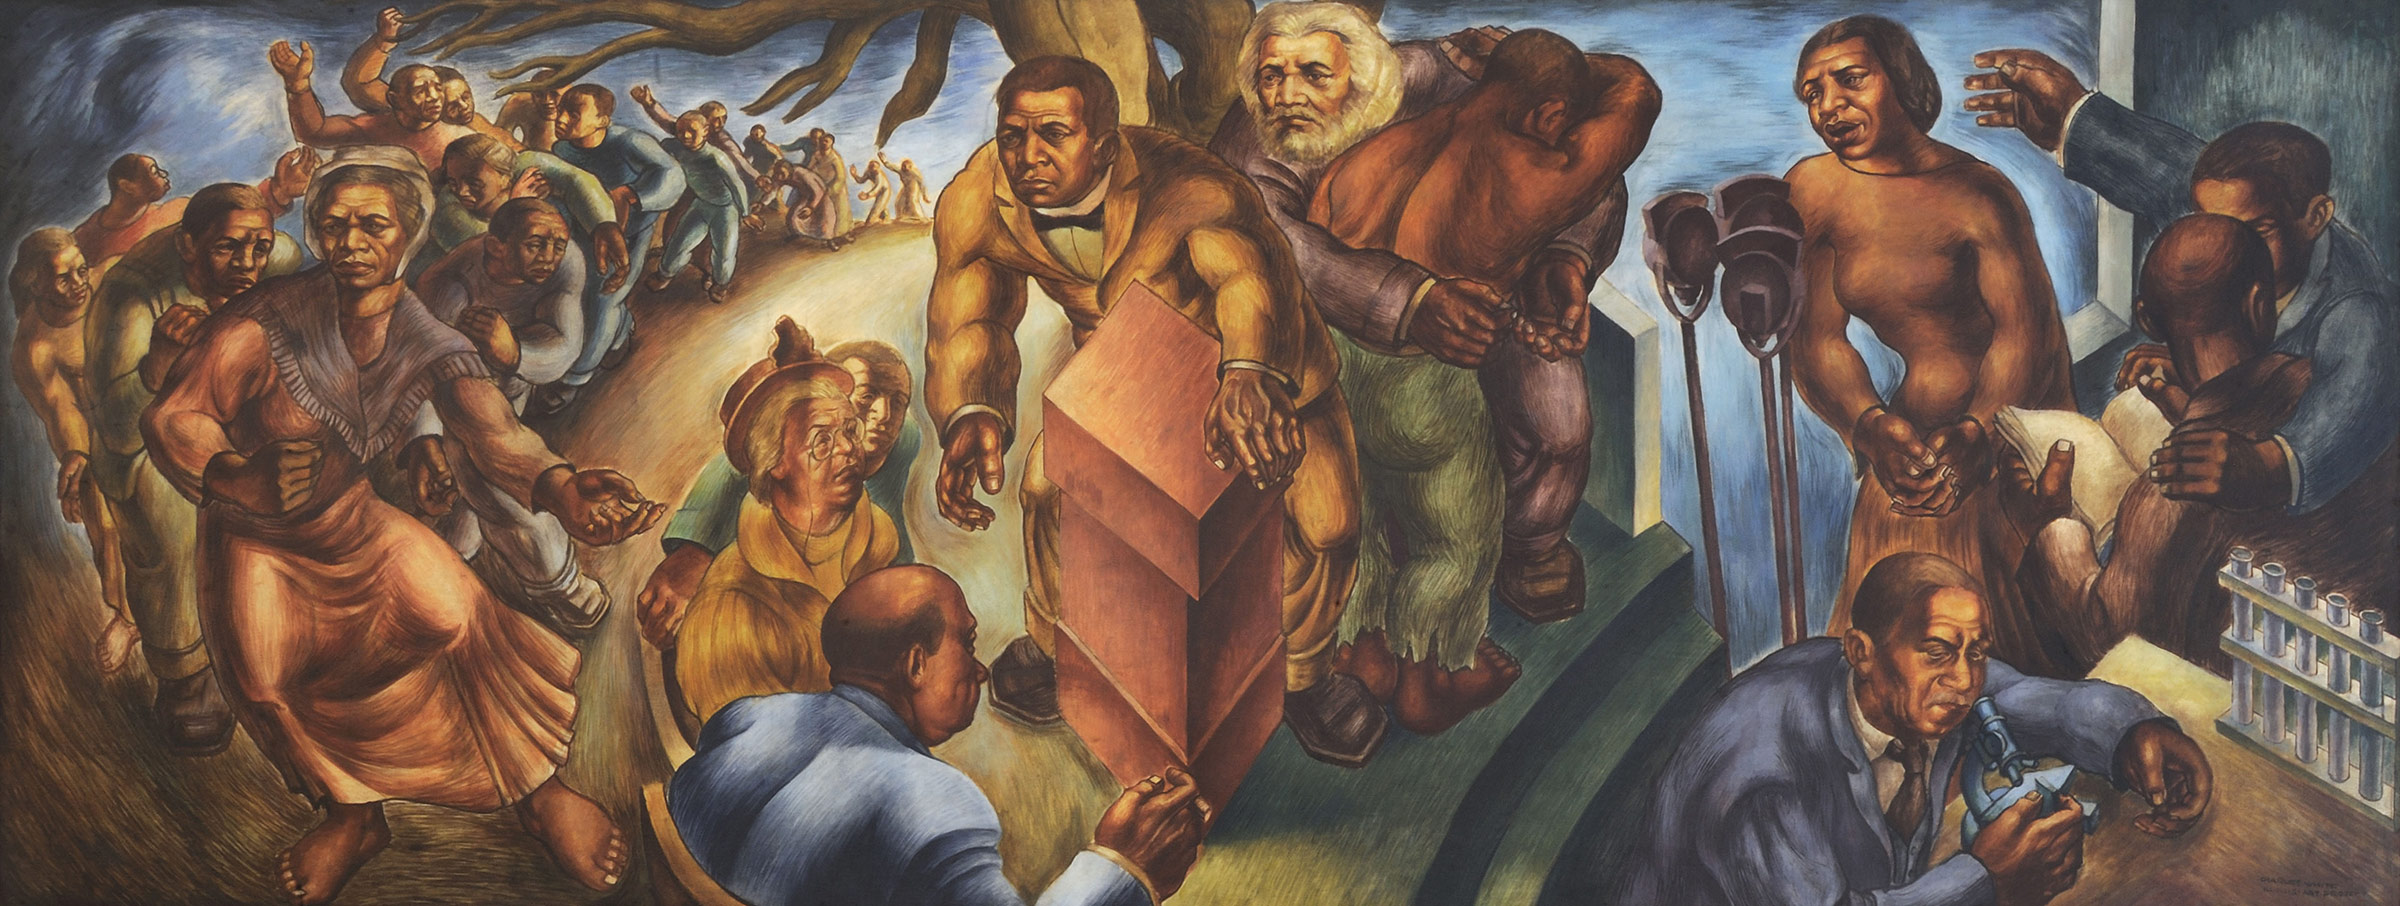 Charles White, Progress of the American Negro: Five Great American Negroes, 1939–40 (Howard University Gallery of Art)